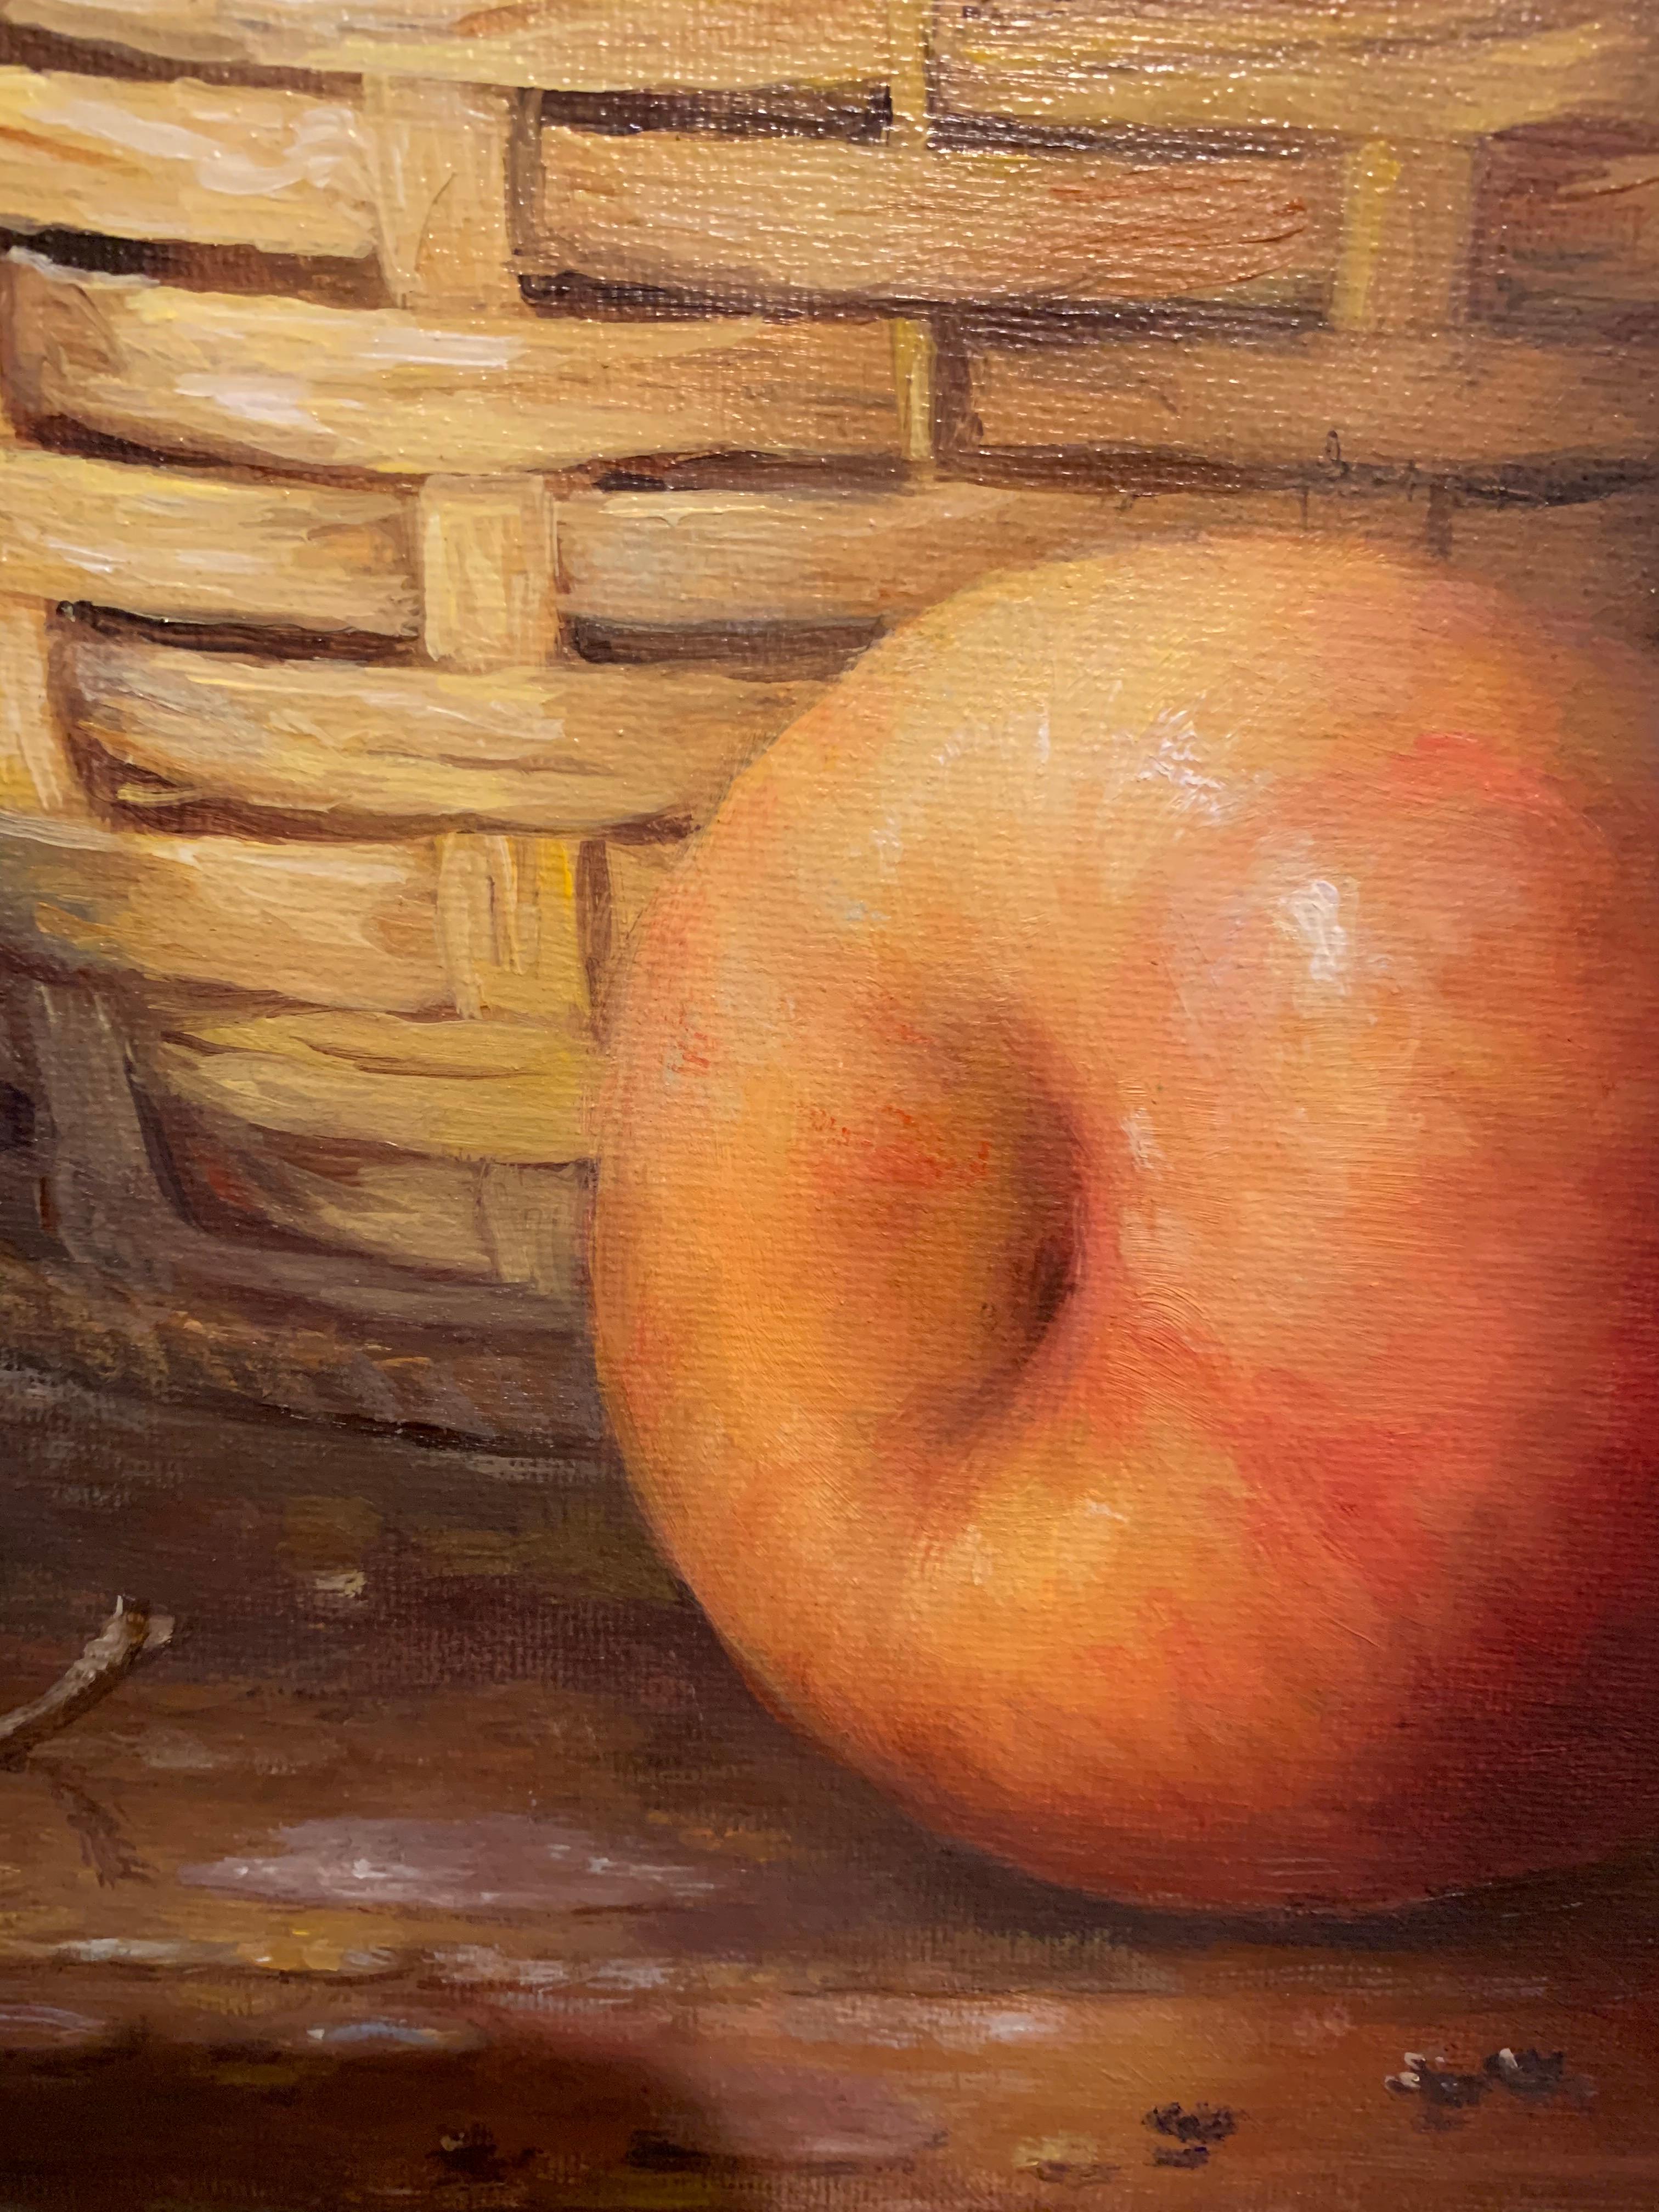 <p>Artist Comments<br />A refreshing basket of juicy red apples after a rainstorm. Raindrops slowly dry under the warm sun as leaves rustle in the cool wind. Artist Nikolay Rizhankov renders this piece in bright vivid colors reminiscent of a summer